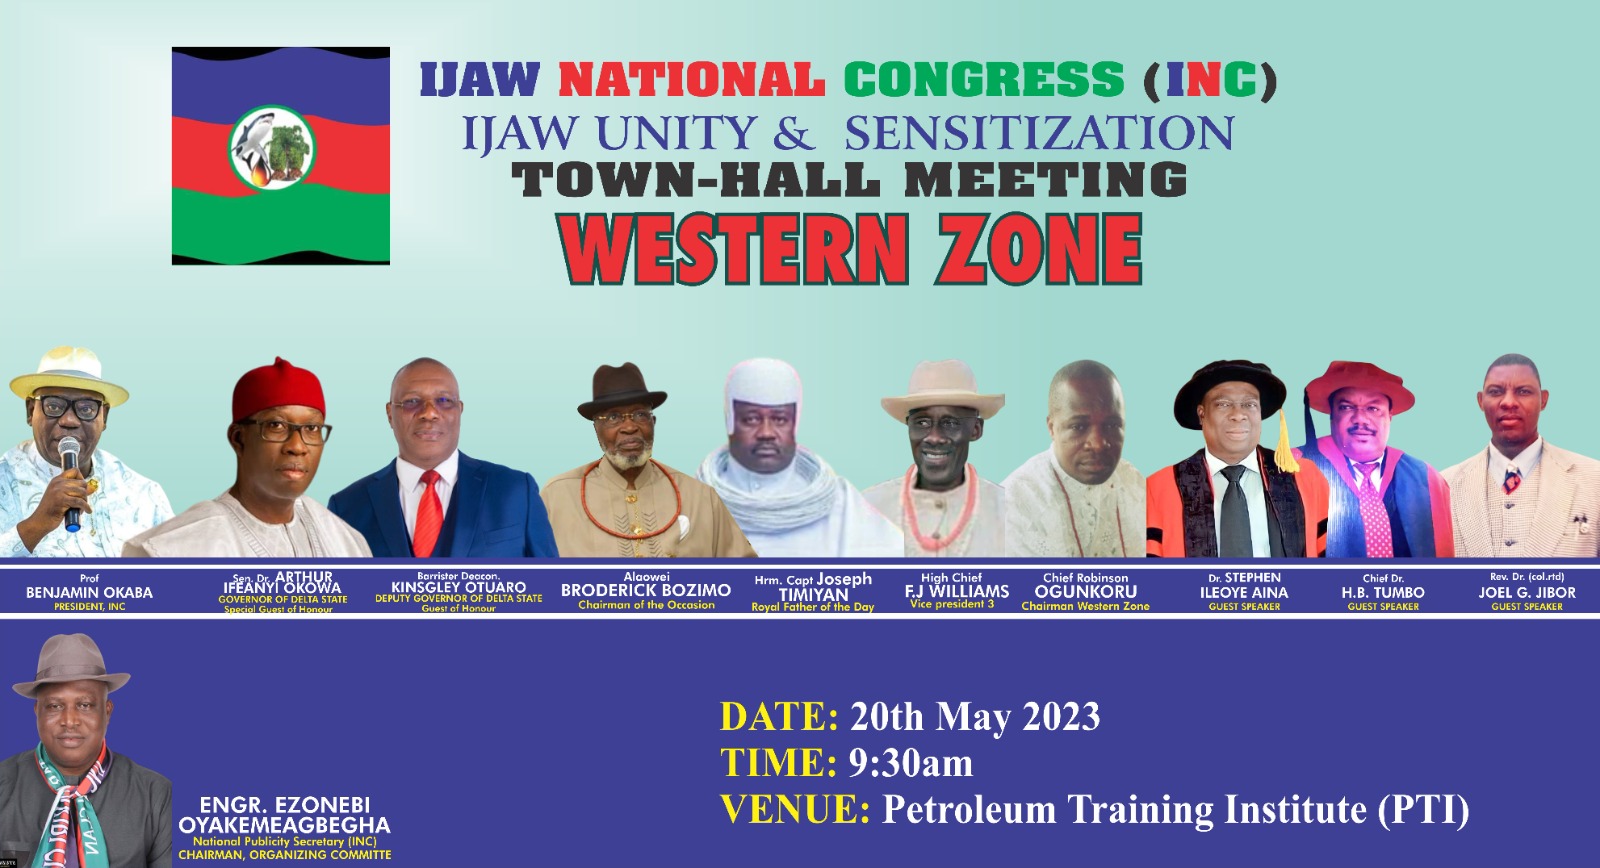 Ijaws to Convene, Strategize For a Prosperous Nation | Daily Report Nigeria